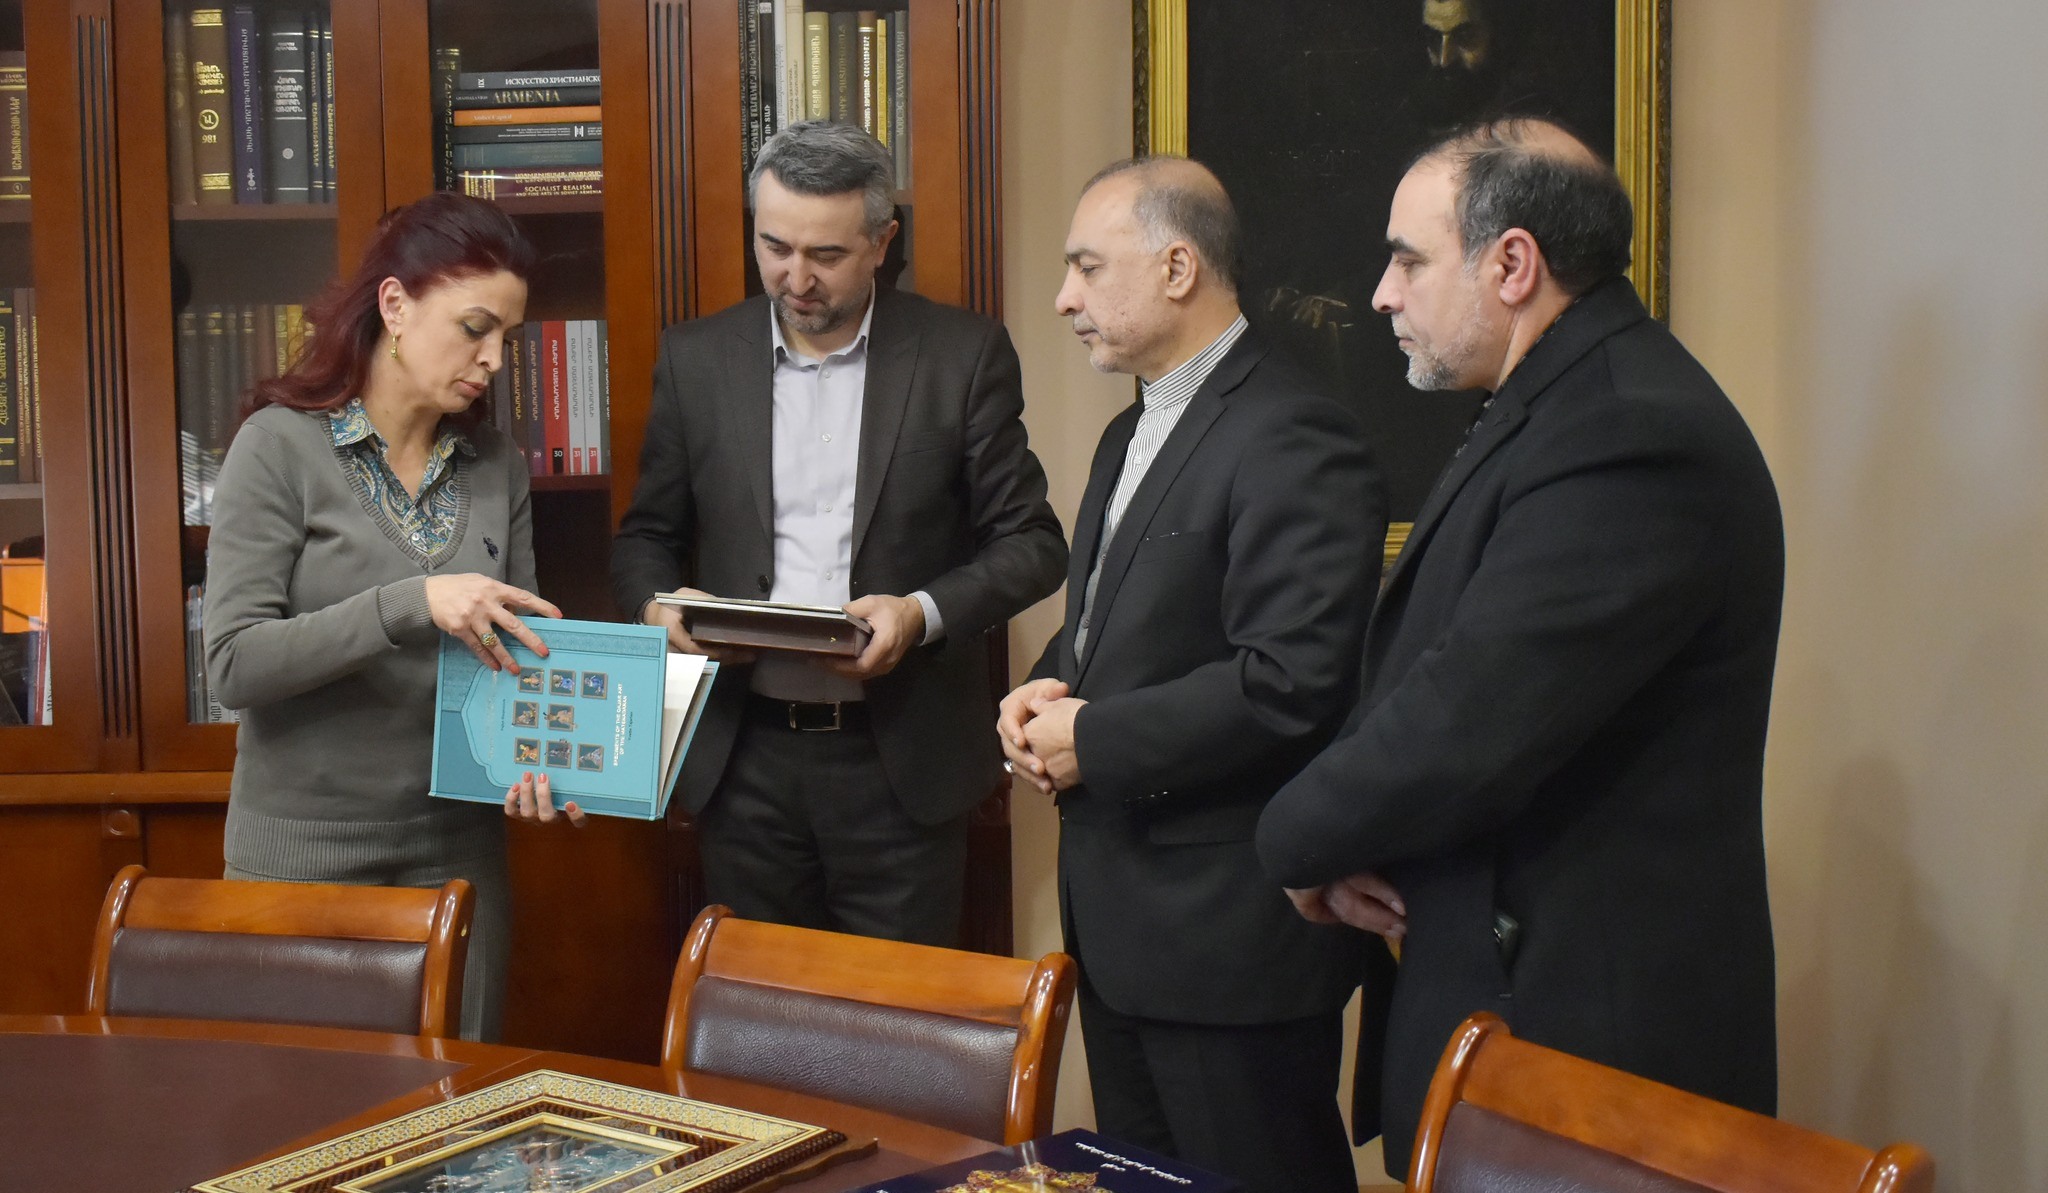 Ambassador of Iran and culture attaché in Armenia visited Matenadaran, joint events discussed